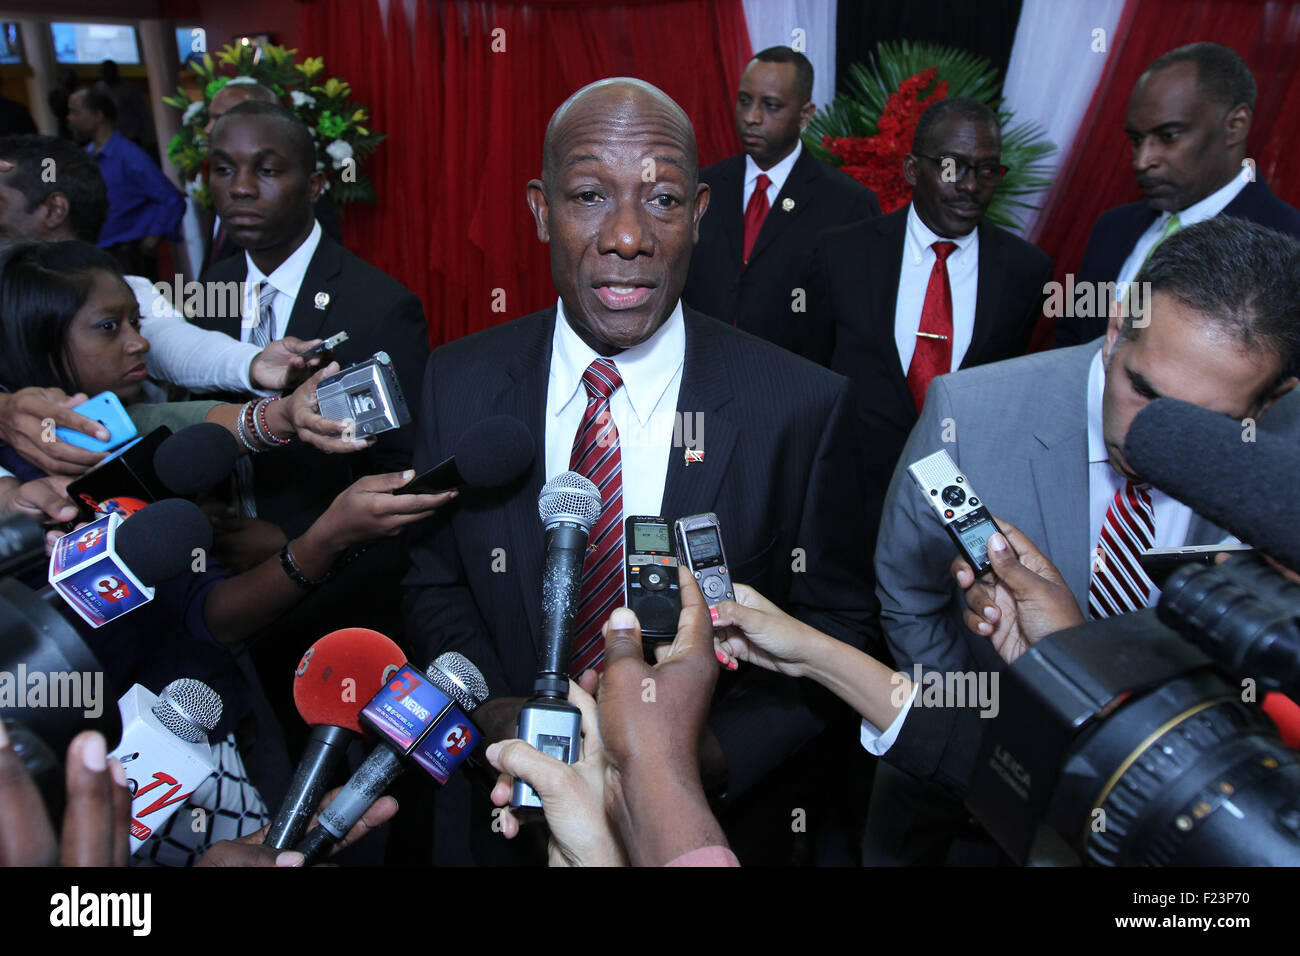 Port of Spain, Trinidad & Tobago. 9th September, 2015. Keith Christopher Rowley (C), Prime Minister of Trinidad & Tobago, speaks to journalists at his swearing-in ceremony at Queen's Hall in Port of Spain, Trinidad on September 9, 2015.  (Photo by Sean Drakes/Alamy Live News) Credit:  SEAN DRAKES/Alamy Live News Stock Photo